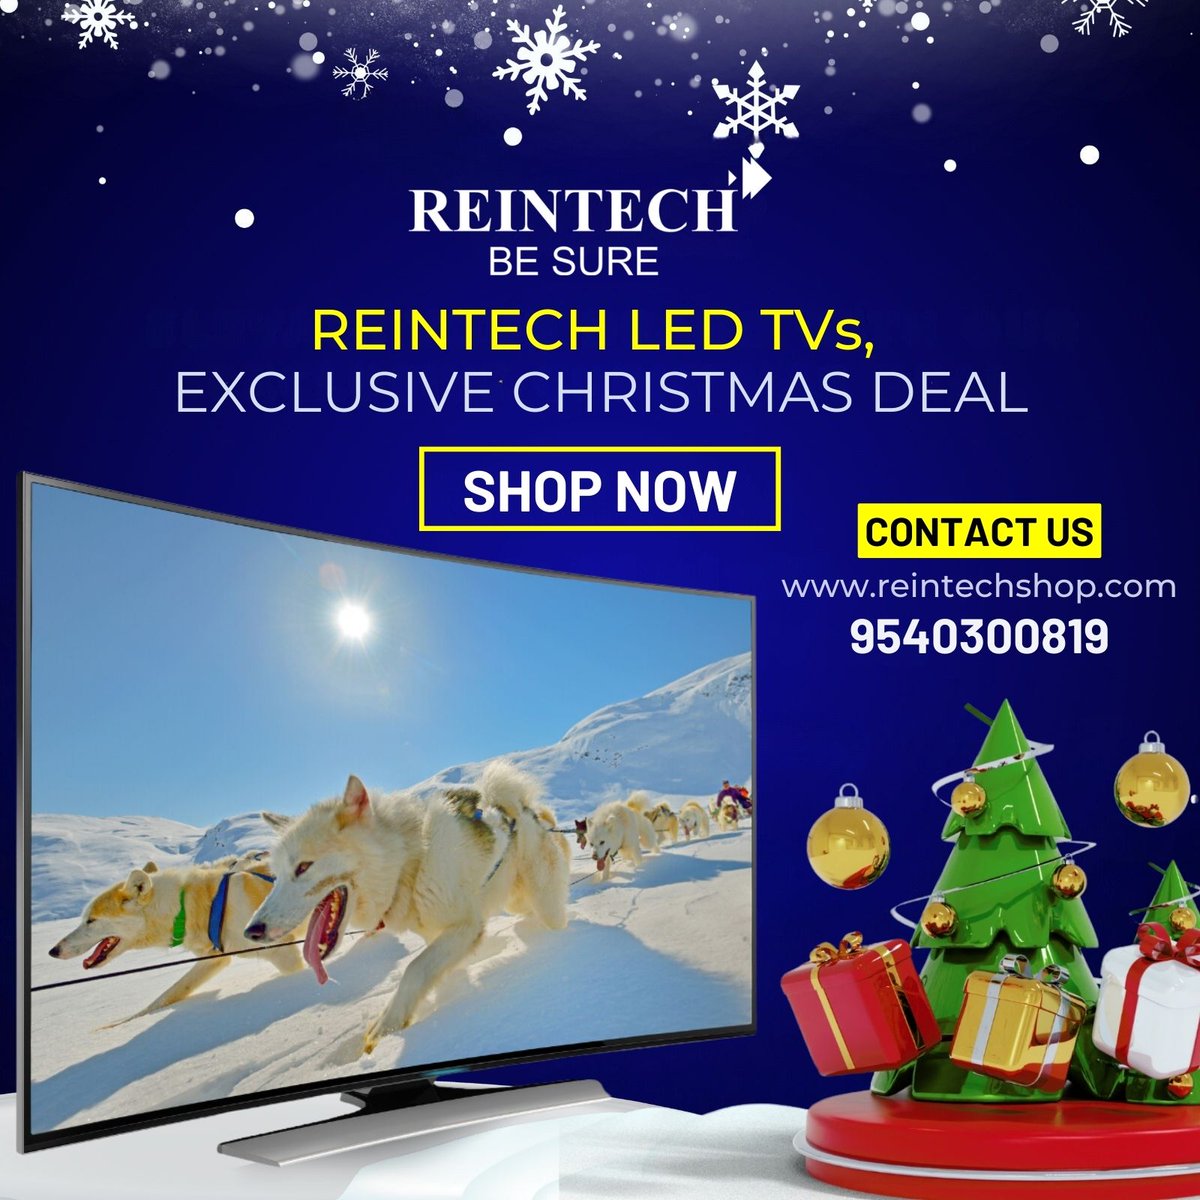 🔥It’s the perfect time to gift yourself something special - Reintech LED TV exclusive #Christmas deal!

GET Rs.500 OFF on Your First Order | USE CODE RTE500 [reintechshop.com]

#Reintech #LEDTV #television #Sale #wintersale #ChristmasDeals #ChristmasShopping #HolidayGifts